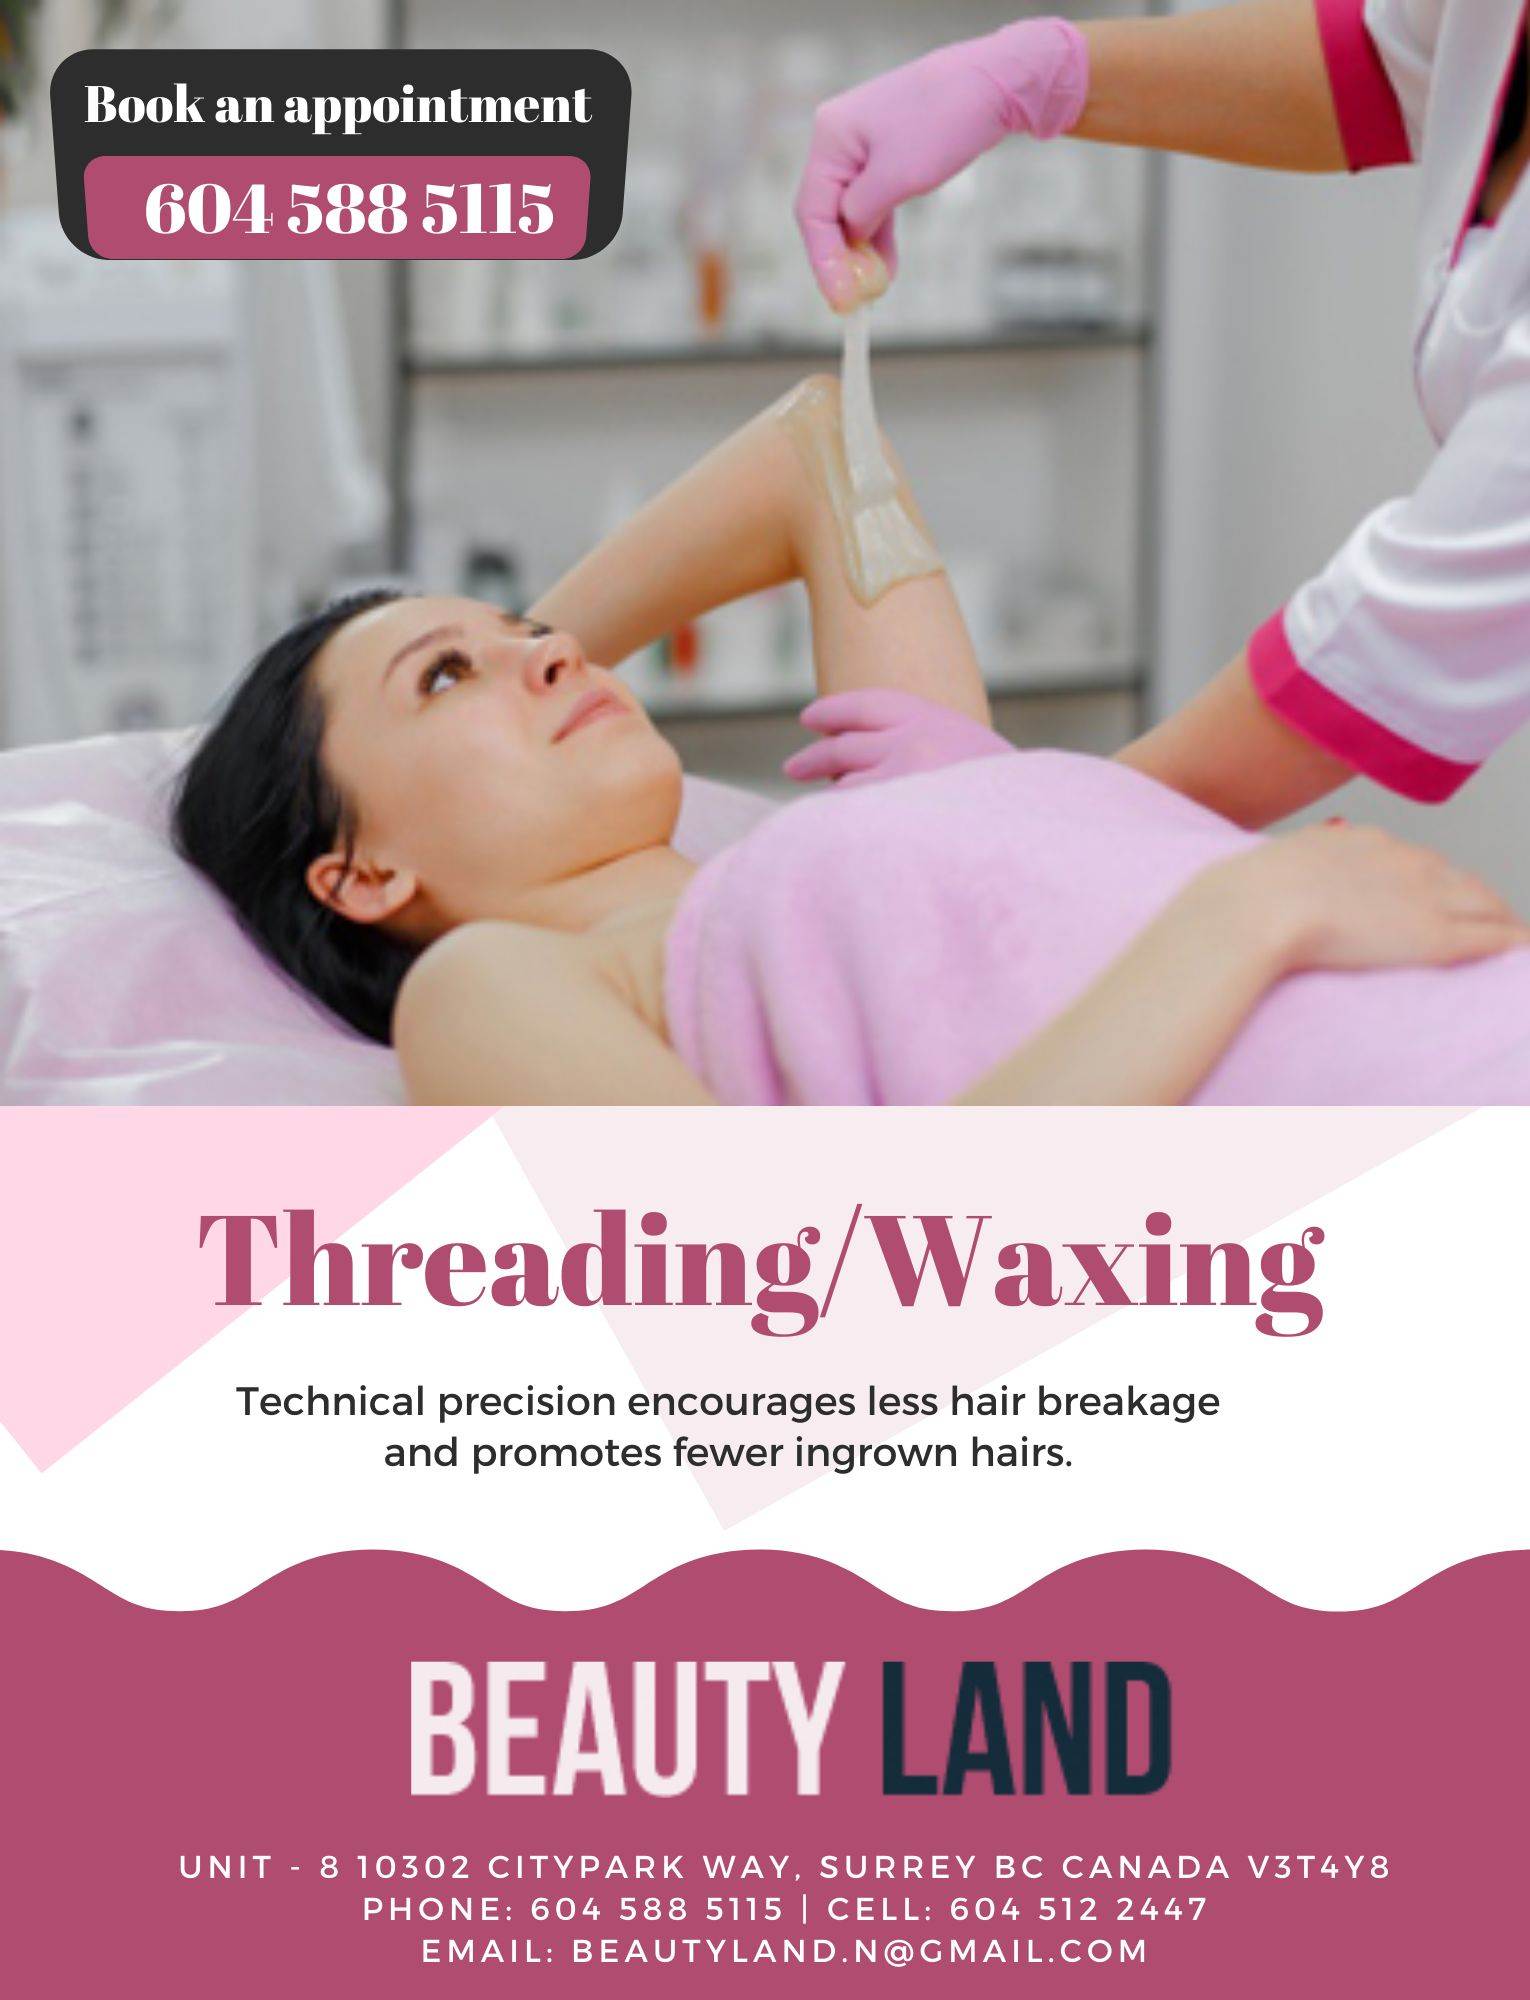 Threading, Waxing Services are available at Beauty Land Salon in BC